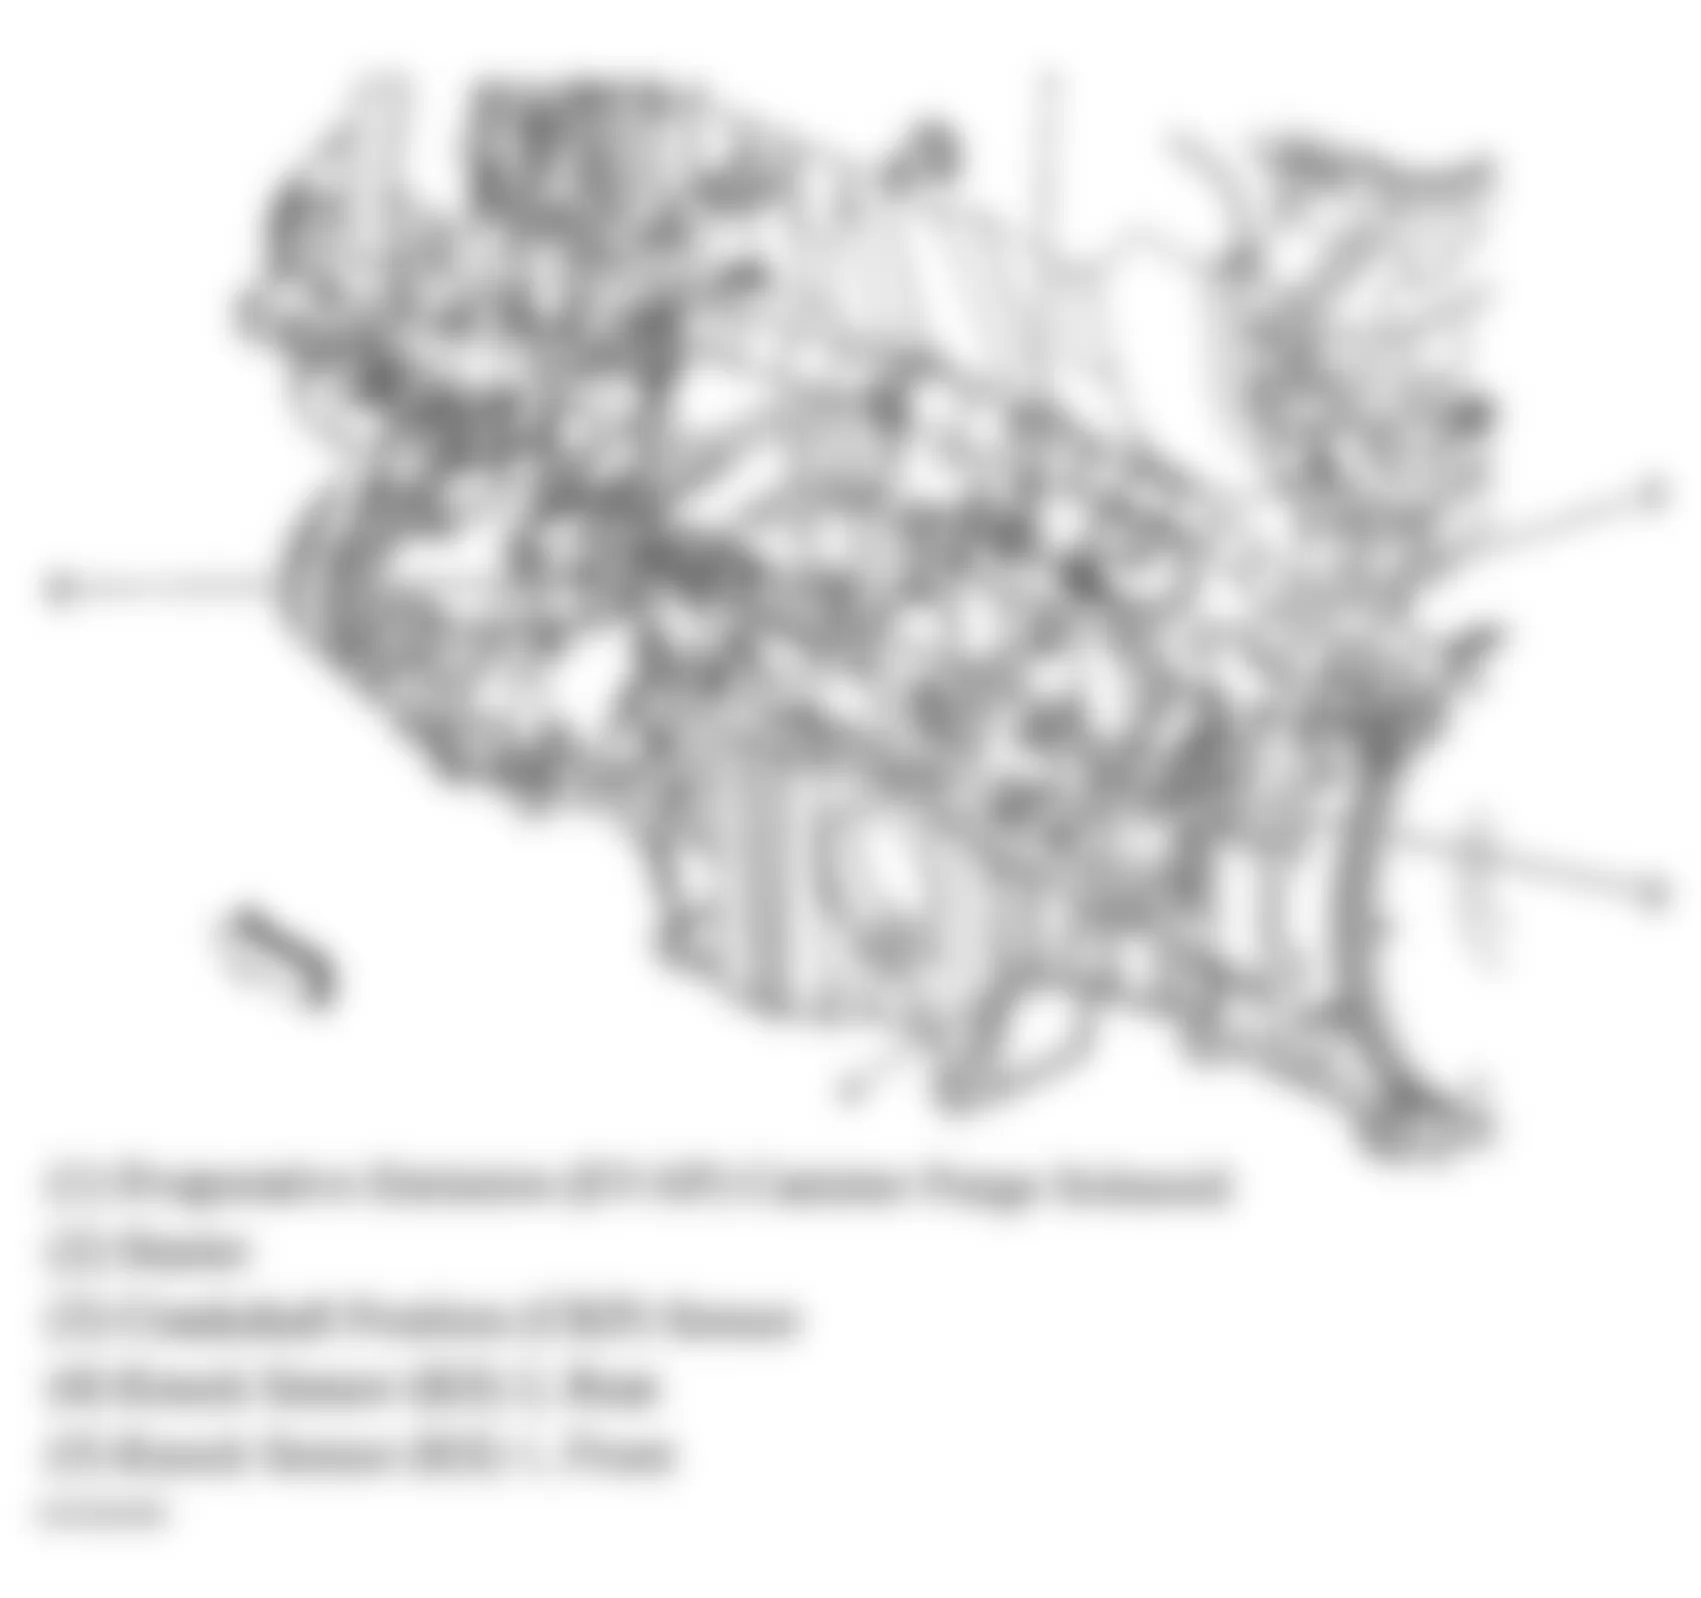 GMC Envoy 2007 - Component Locations -  Lower Left Side Of Engine (4.2L)